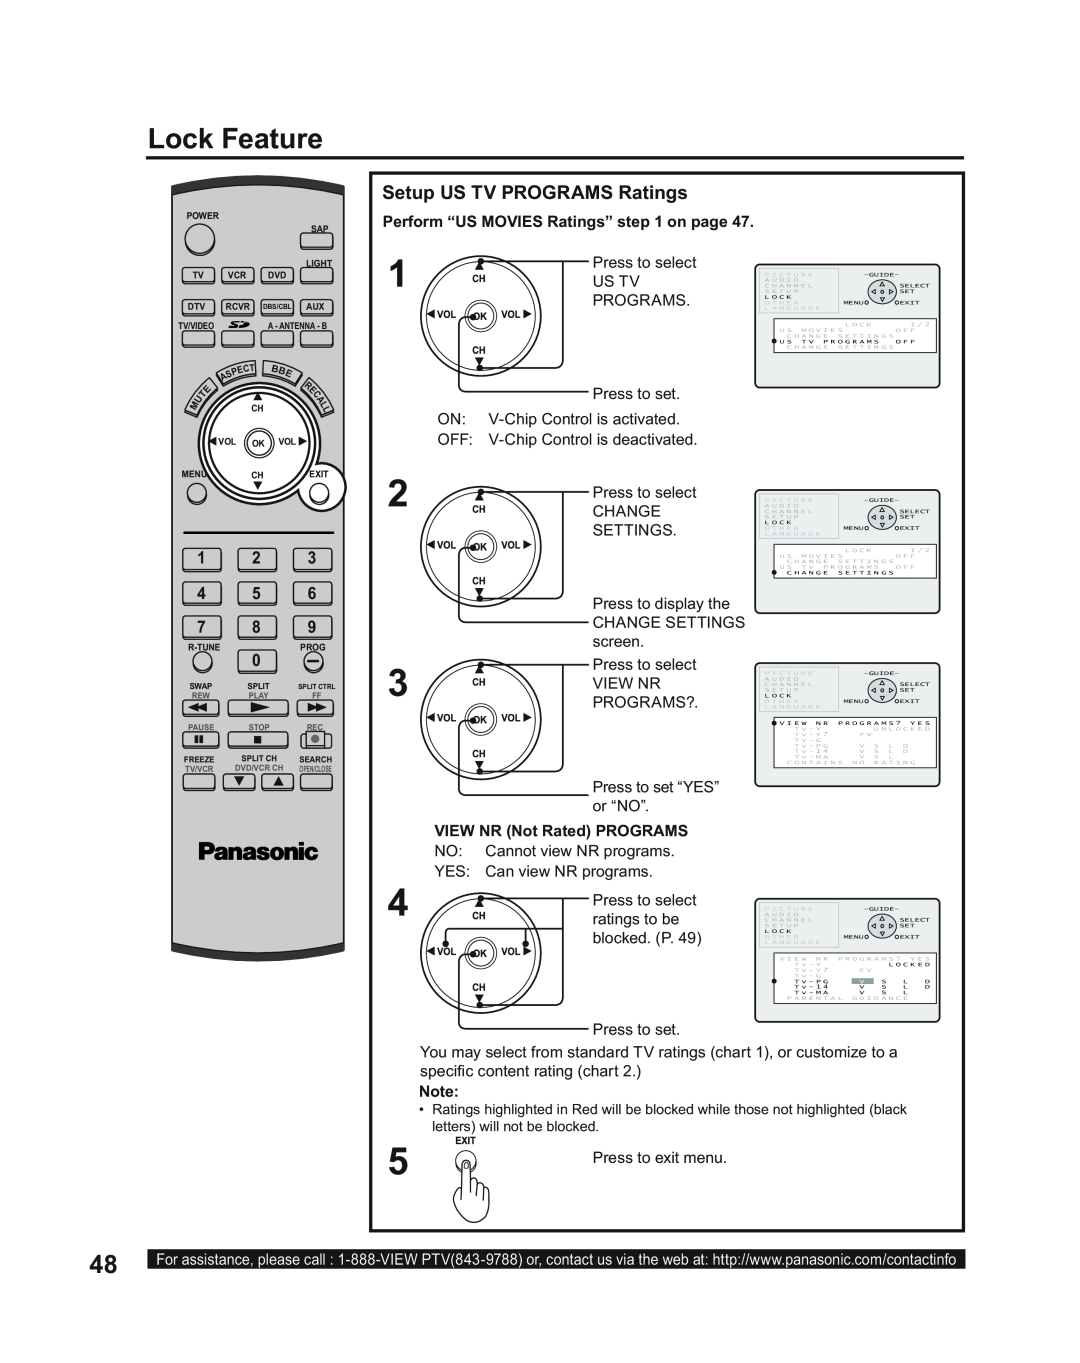 Panasonic PT-43LC14, PT-50LC14, PT-60LC14 Setup US TV PROGRAMS Ratings, Lock Feature, Perform “US MOVIES Ratings” on page 